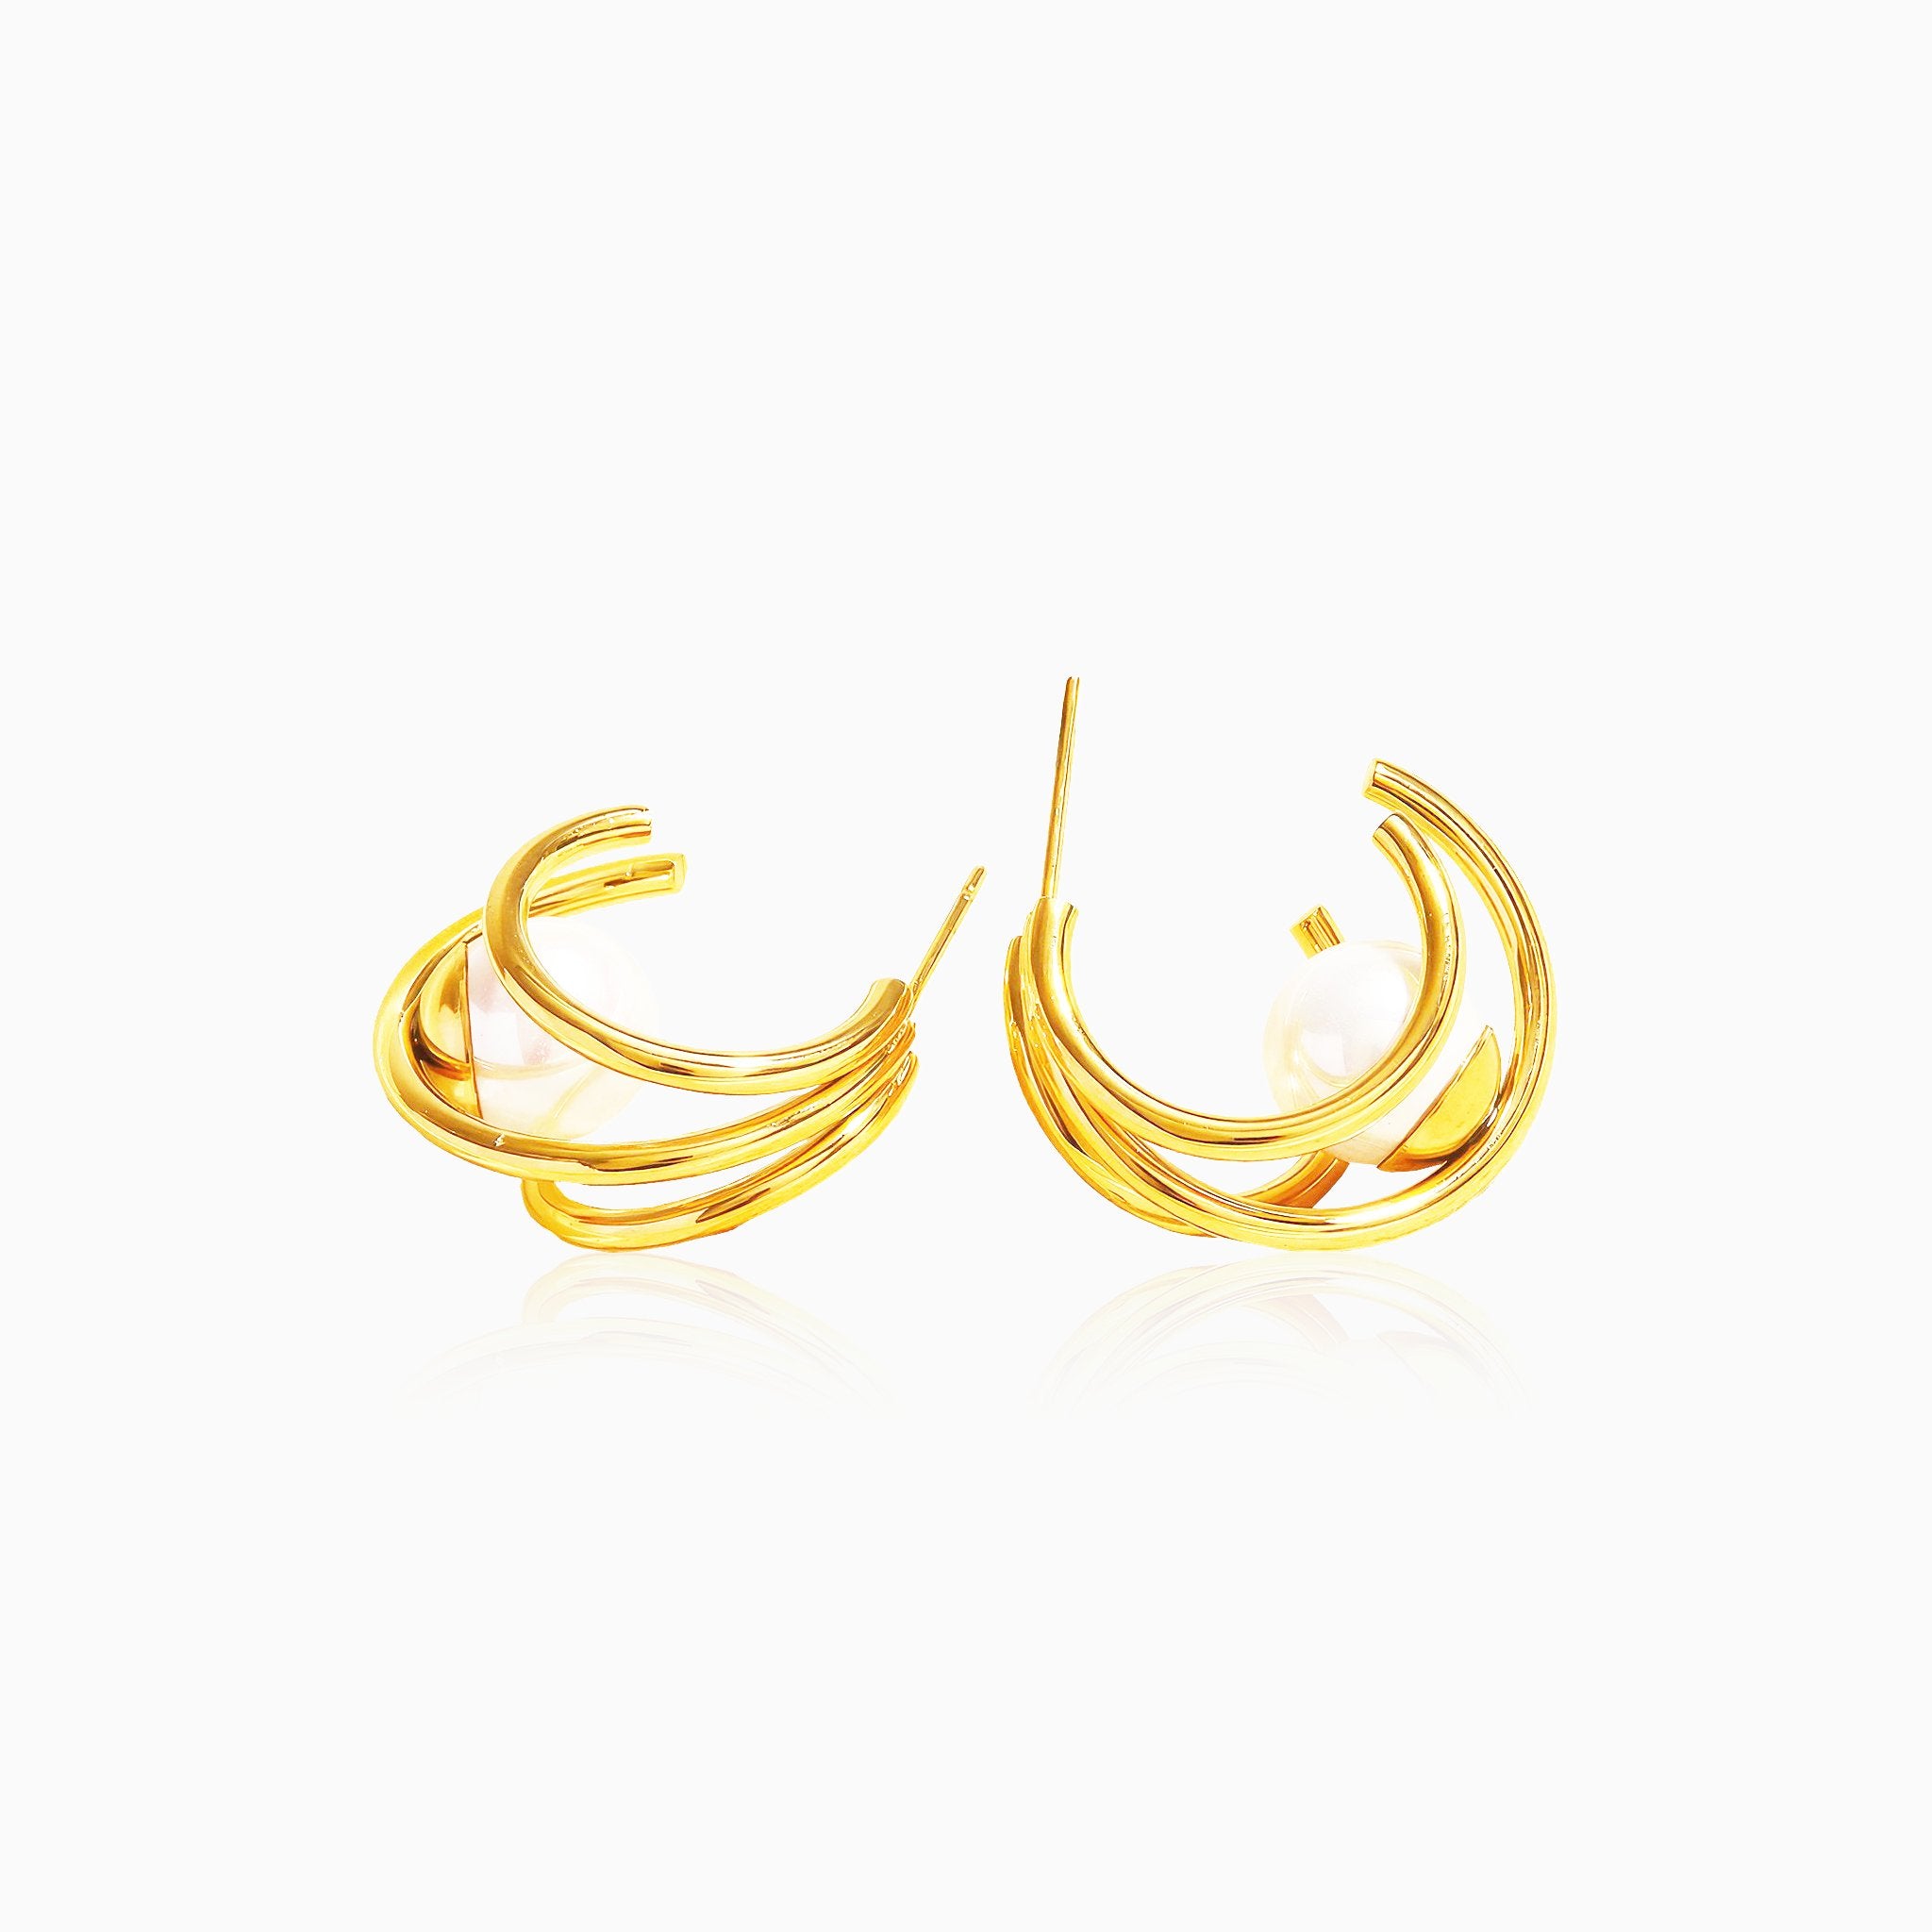 Pearl C-Shape Earrings - Nobbier - Earrings - 18K Gold And Titanium PVD Coated Jewelry